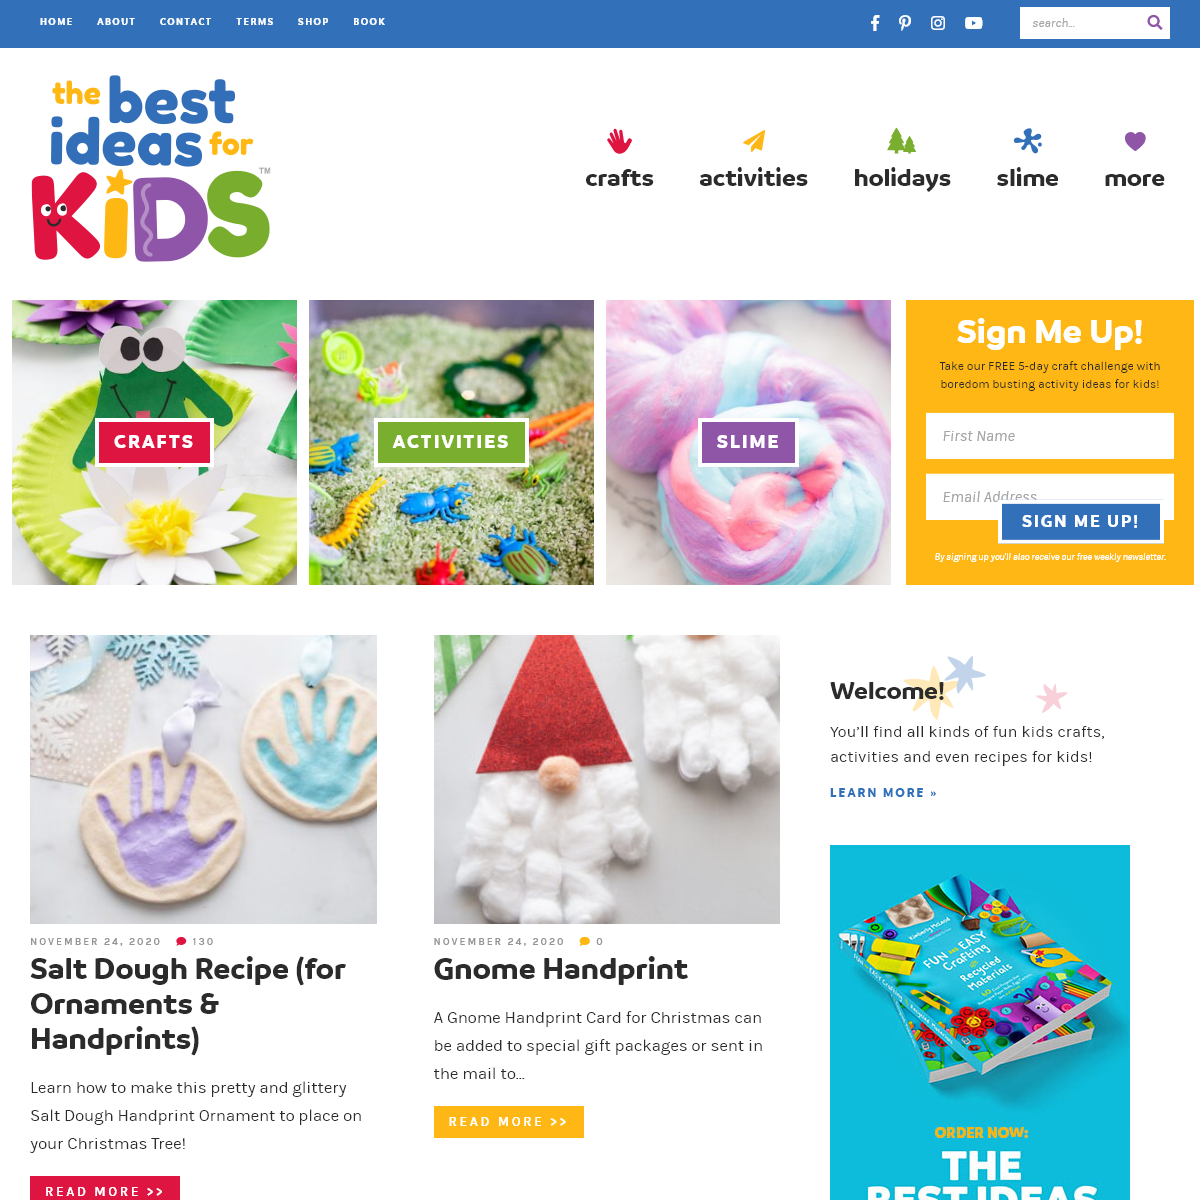 A complete backup of thebestideasforkids.com